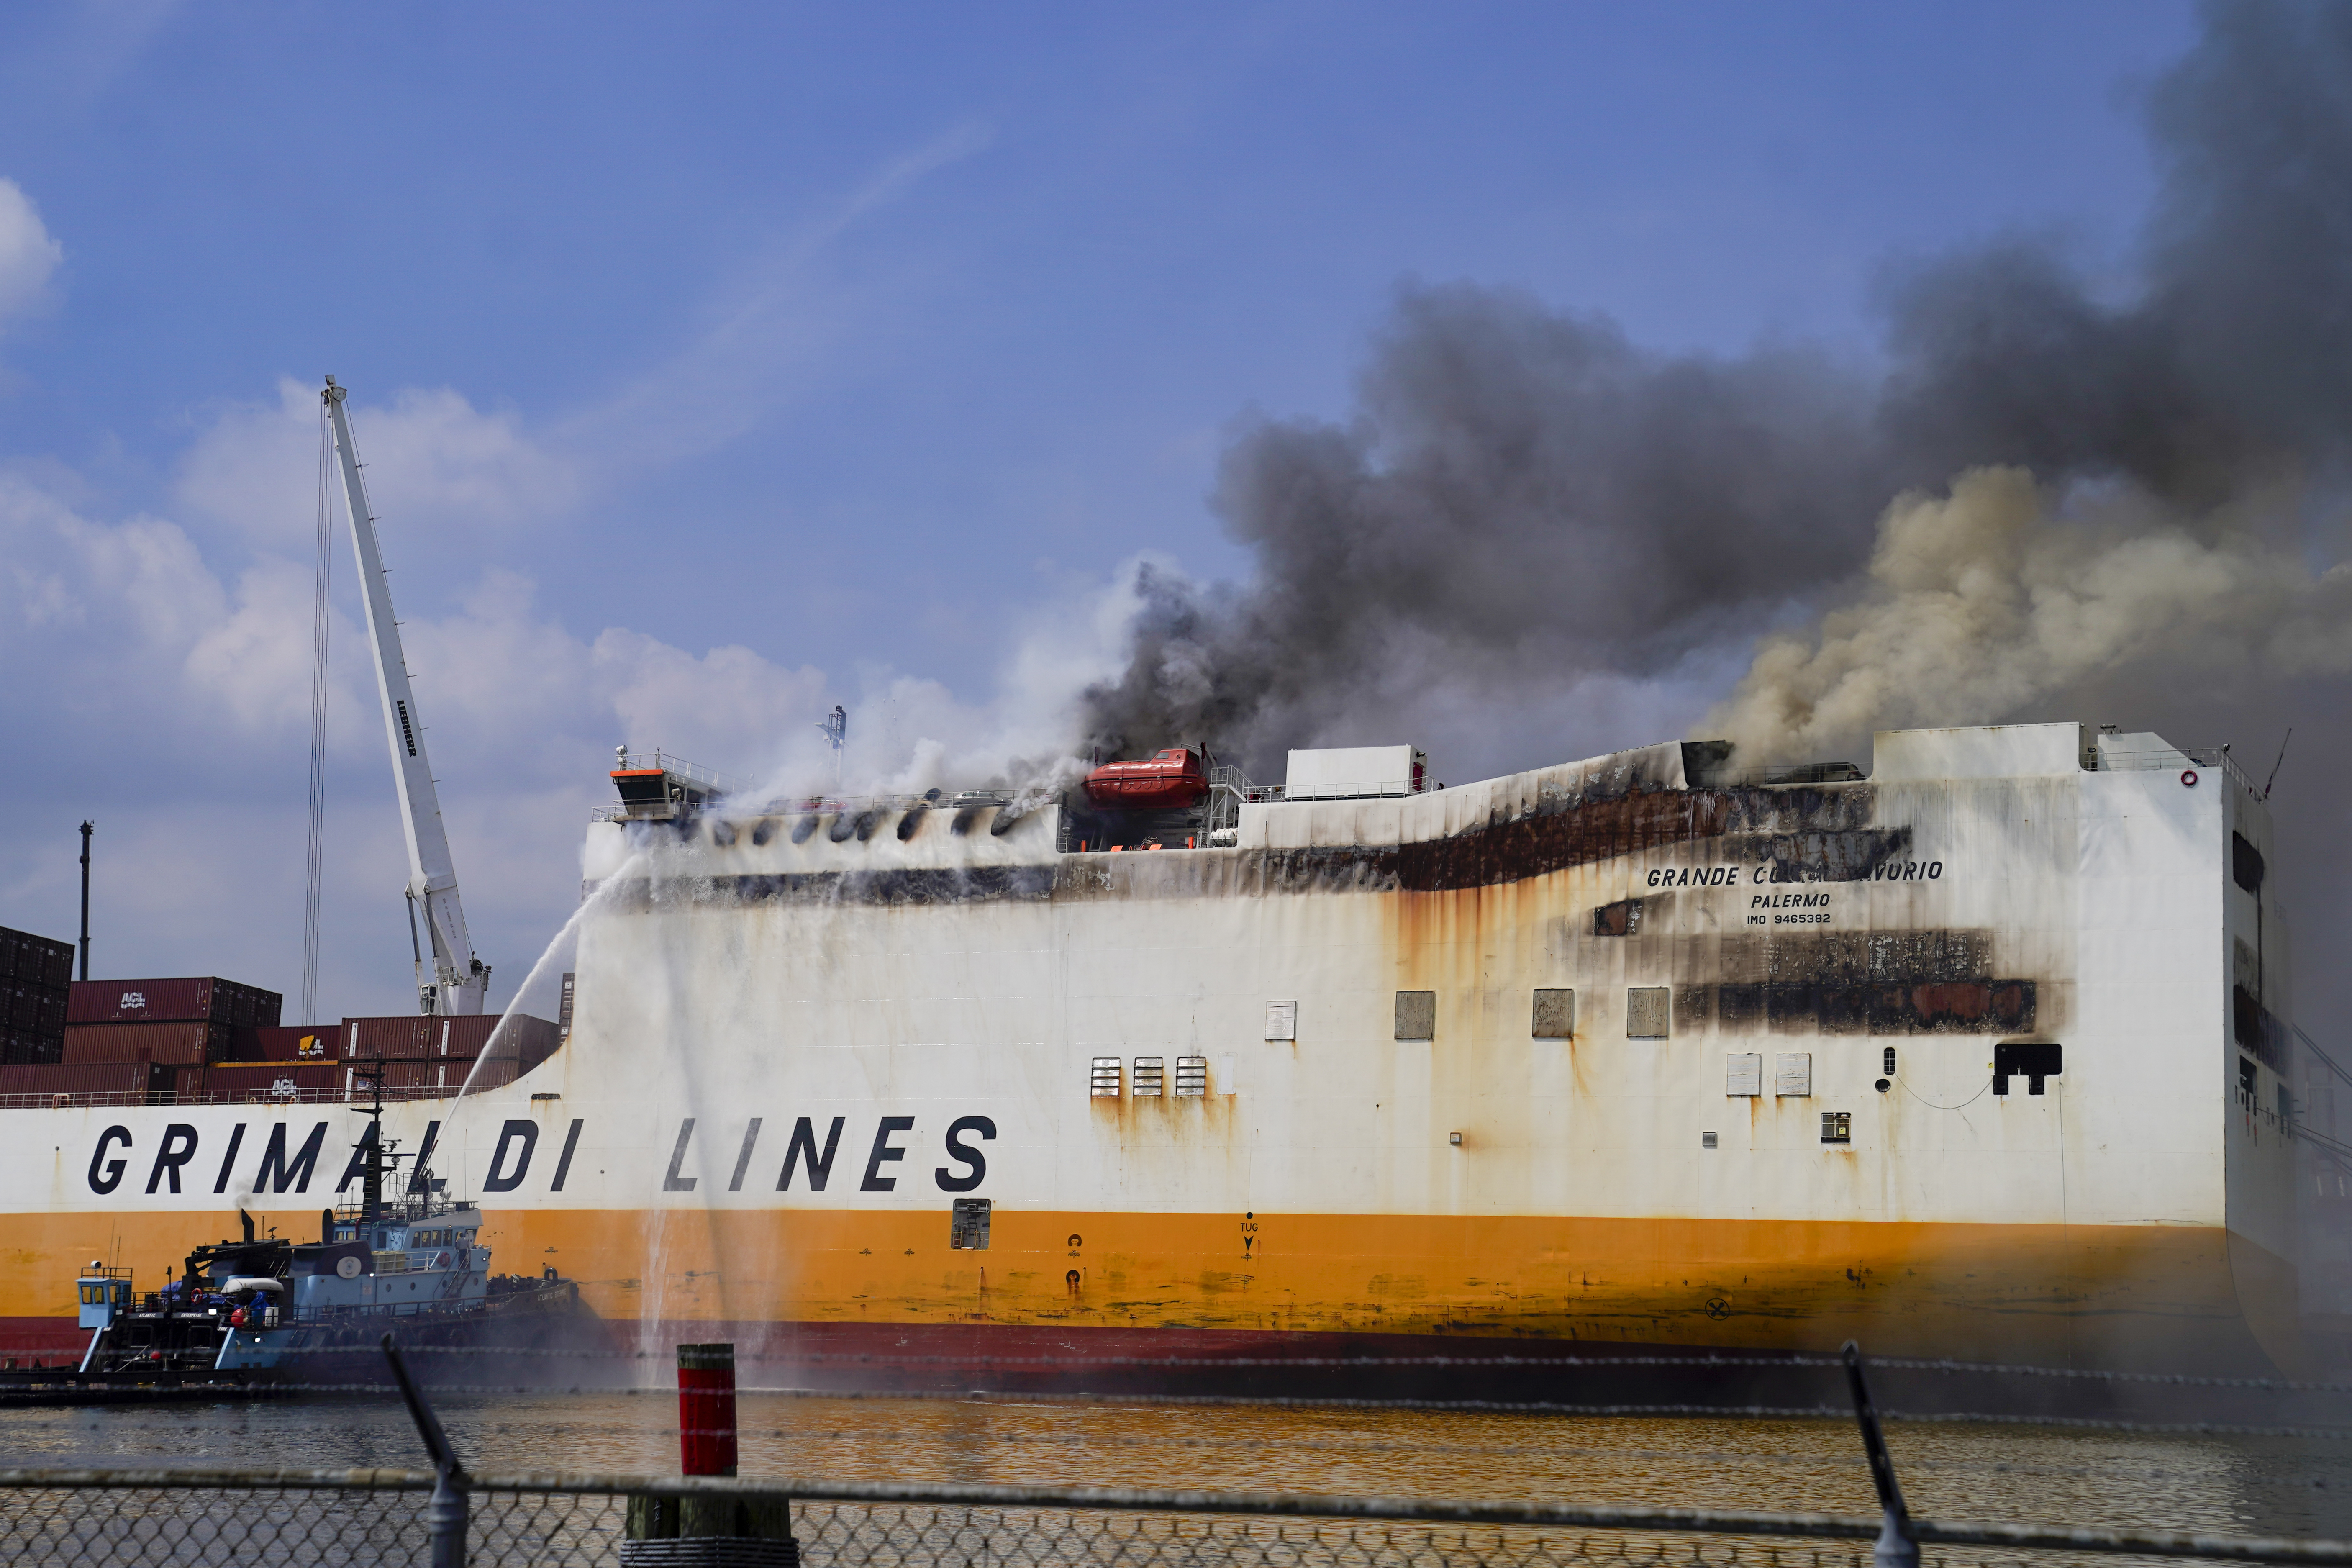 Port Newark cargo ship fire: Mourners gather for funeral of fallen